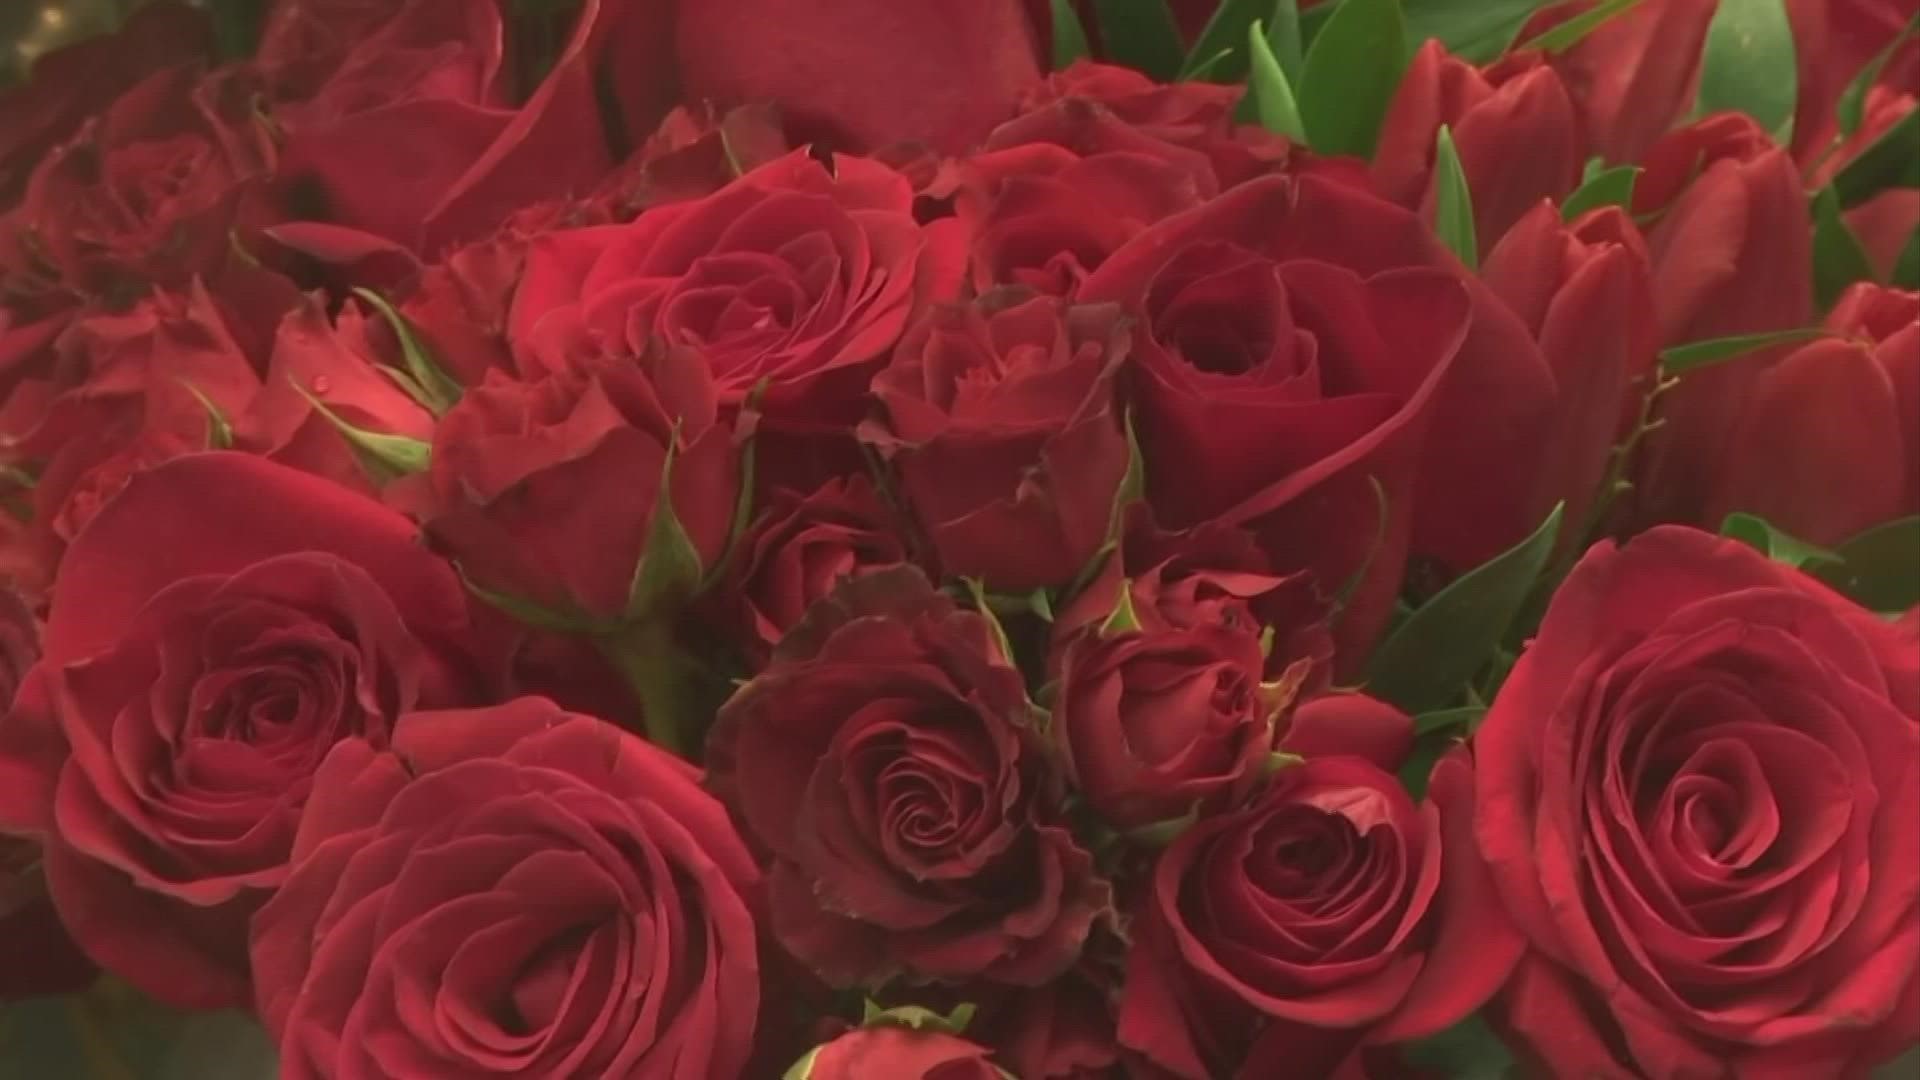 Many flower shops in central Ohio are facing shipping issues due to the pandemic, causing headaches for some Valentine's Day gifts.